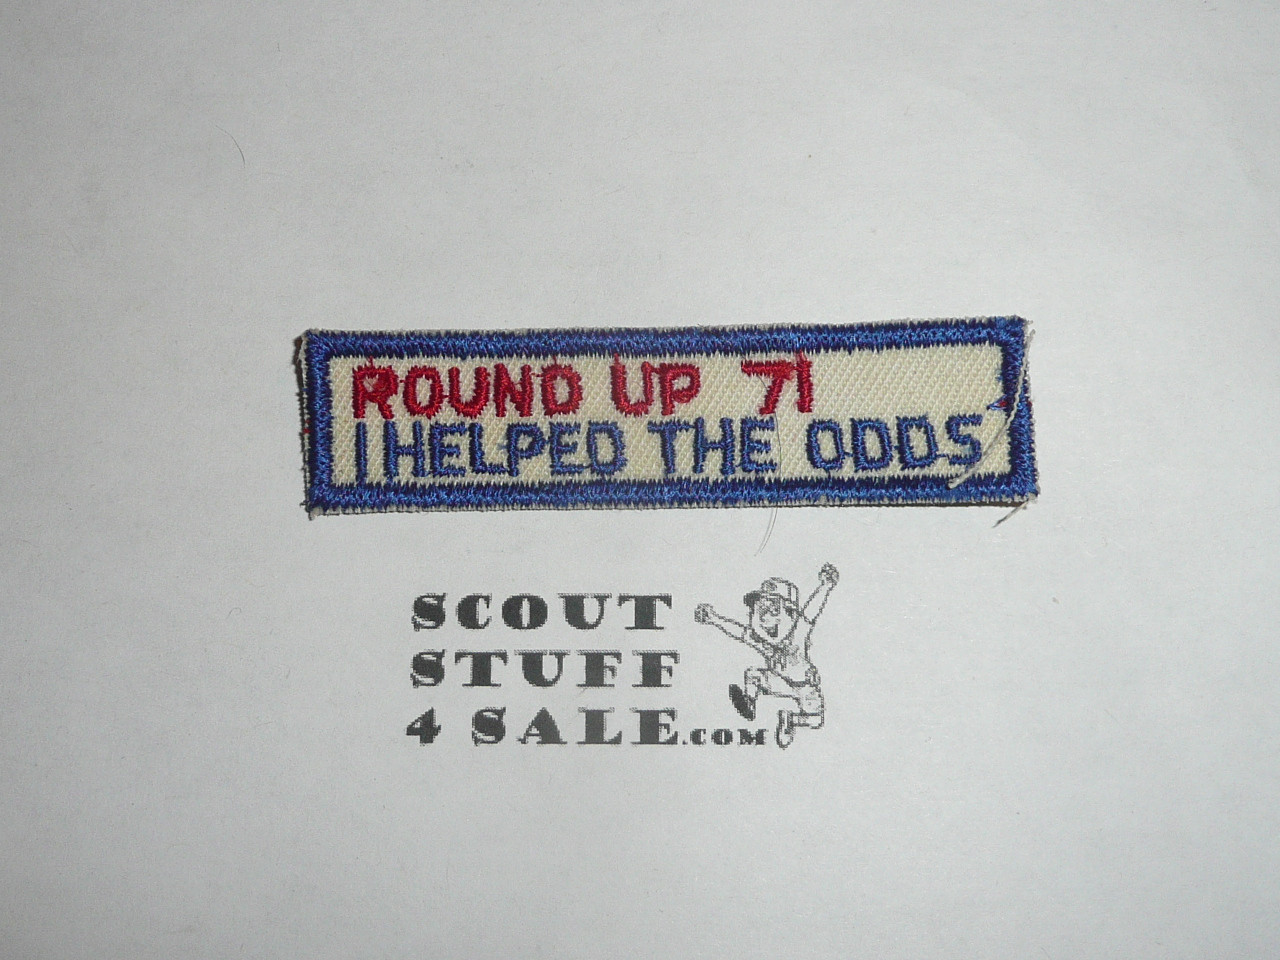 1971 Round-up Patch, Generic BSA issue, I helped the odds segment